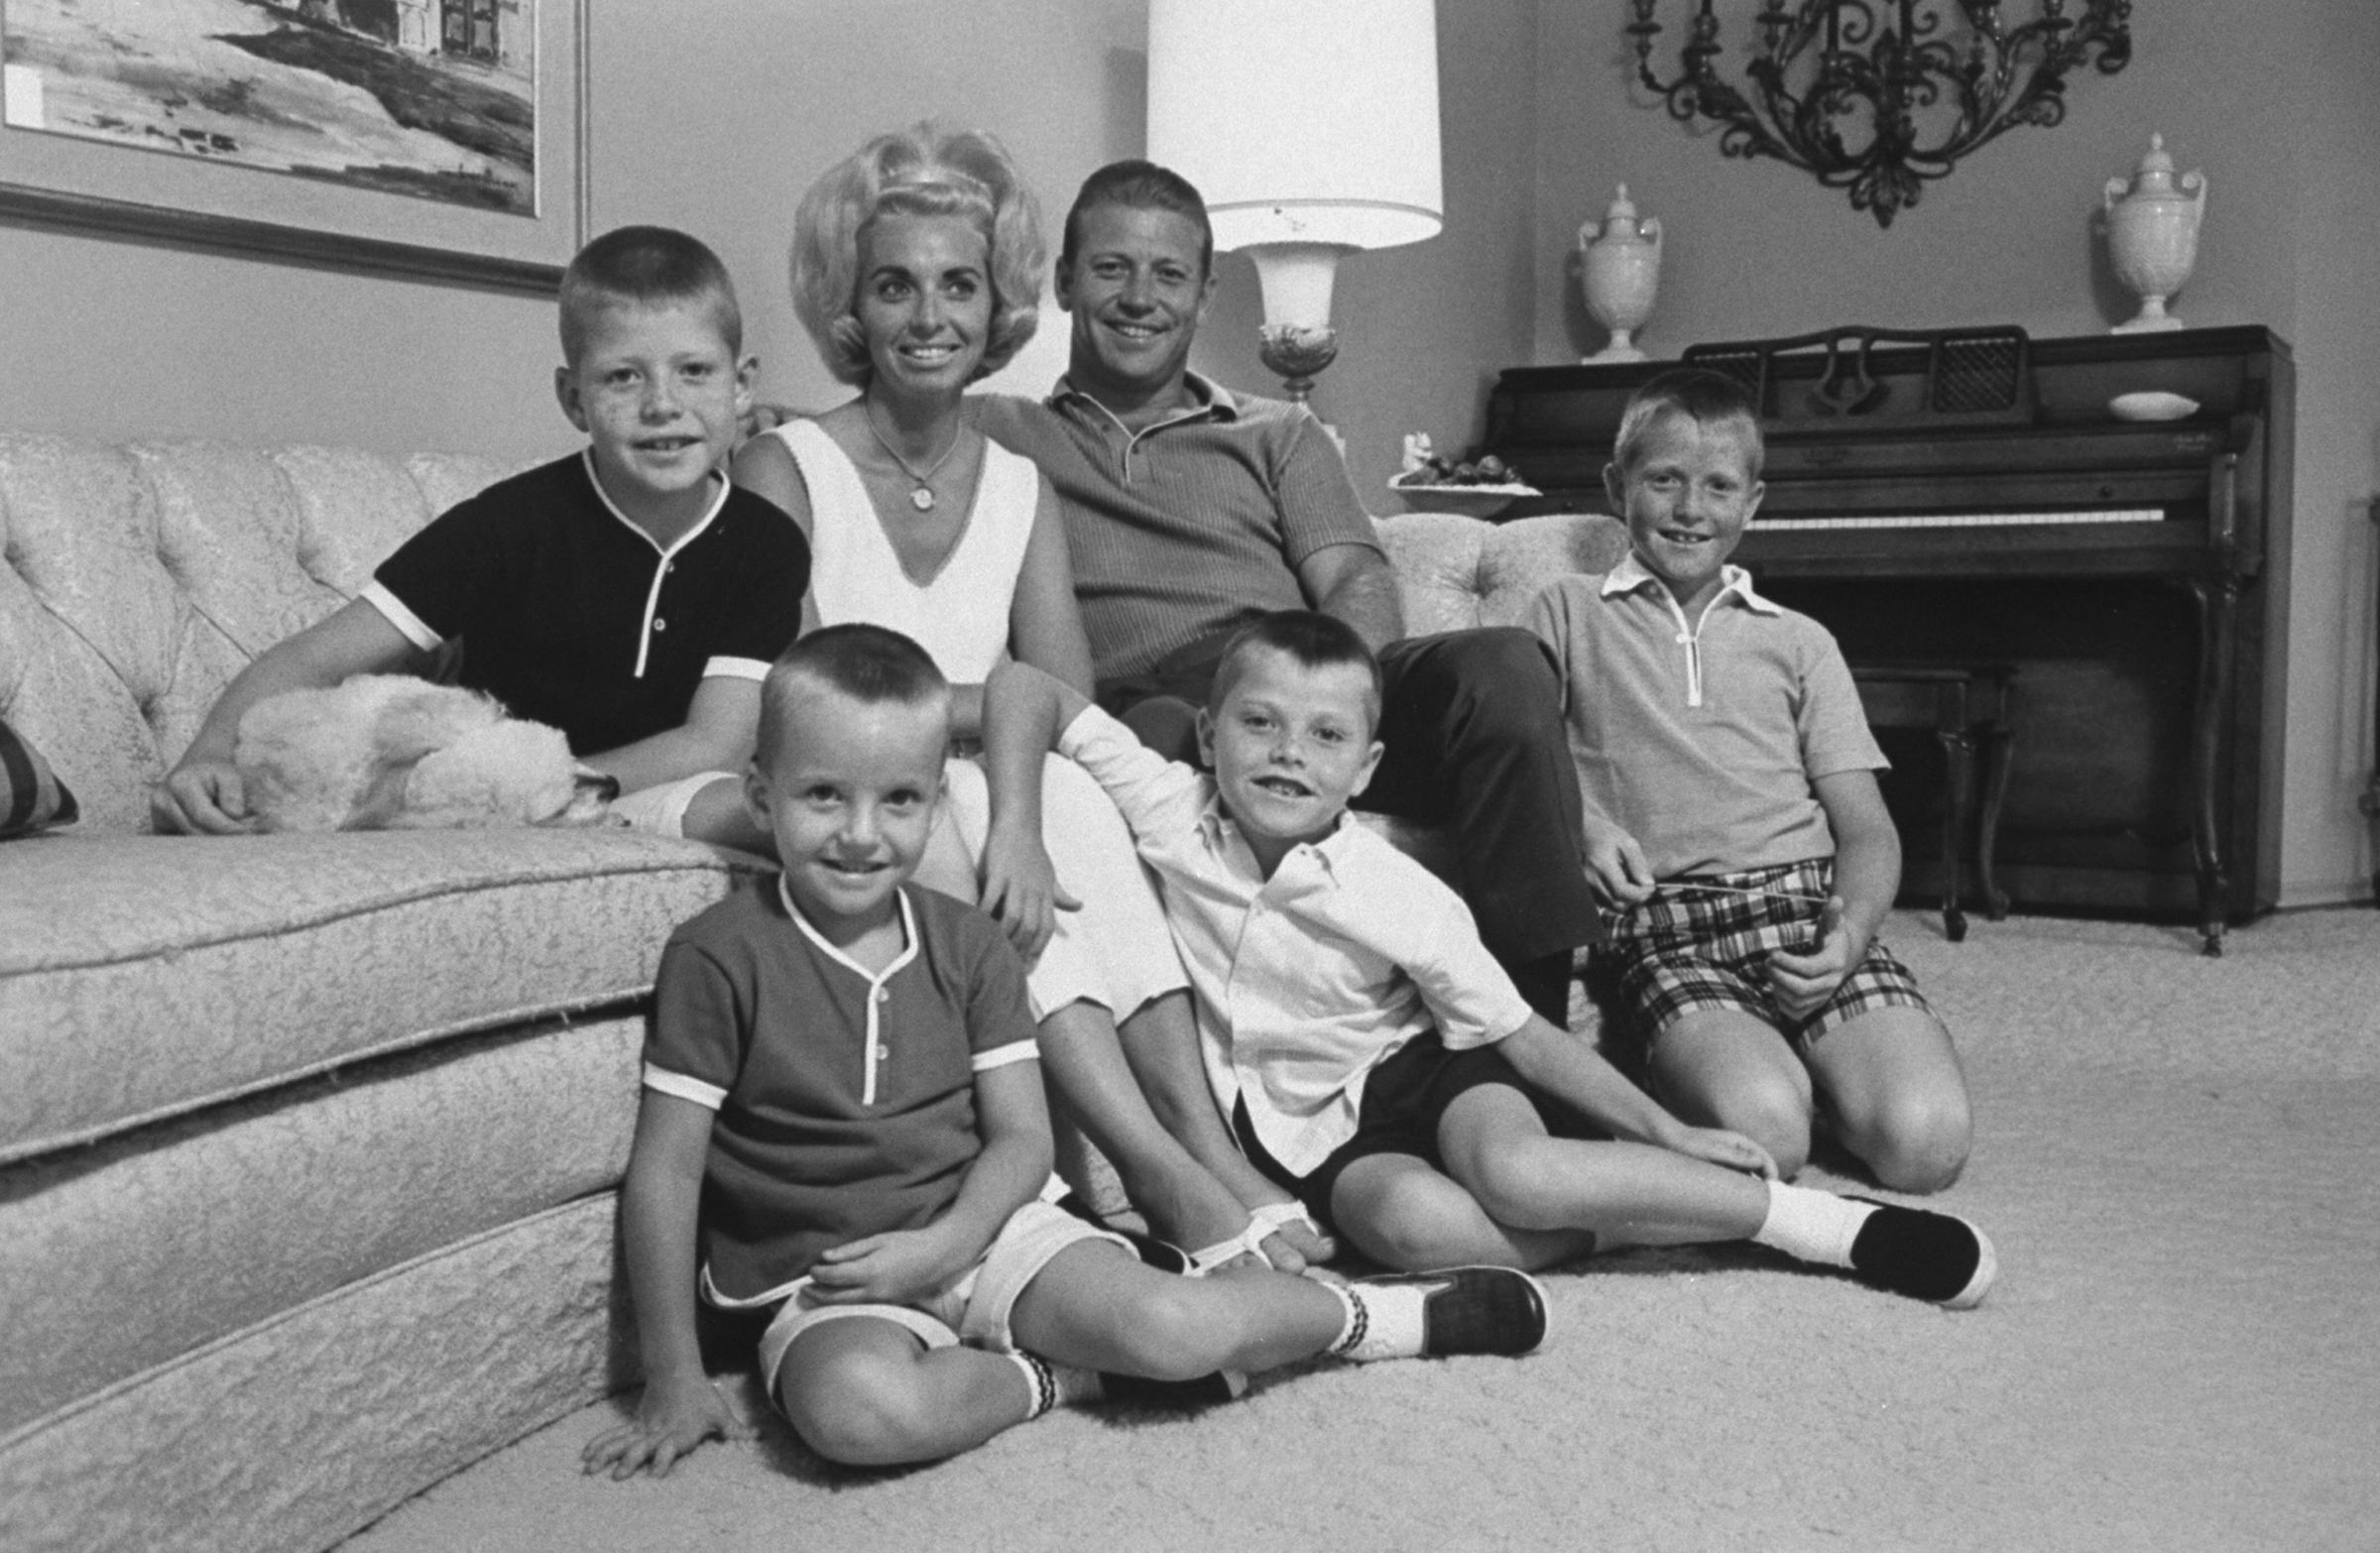 Mickey Mantle poses with his wife Merlyn and their young sons (right to left) Mickey Jr. (who died of cancer in 2000), Billy (who died of Hodgkin's disease in 1994), Danny, and David, in Texas in 1965.